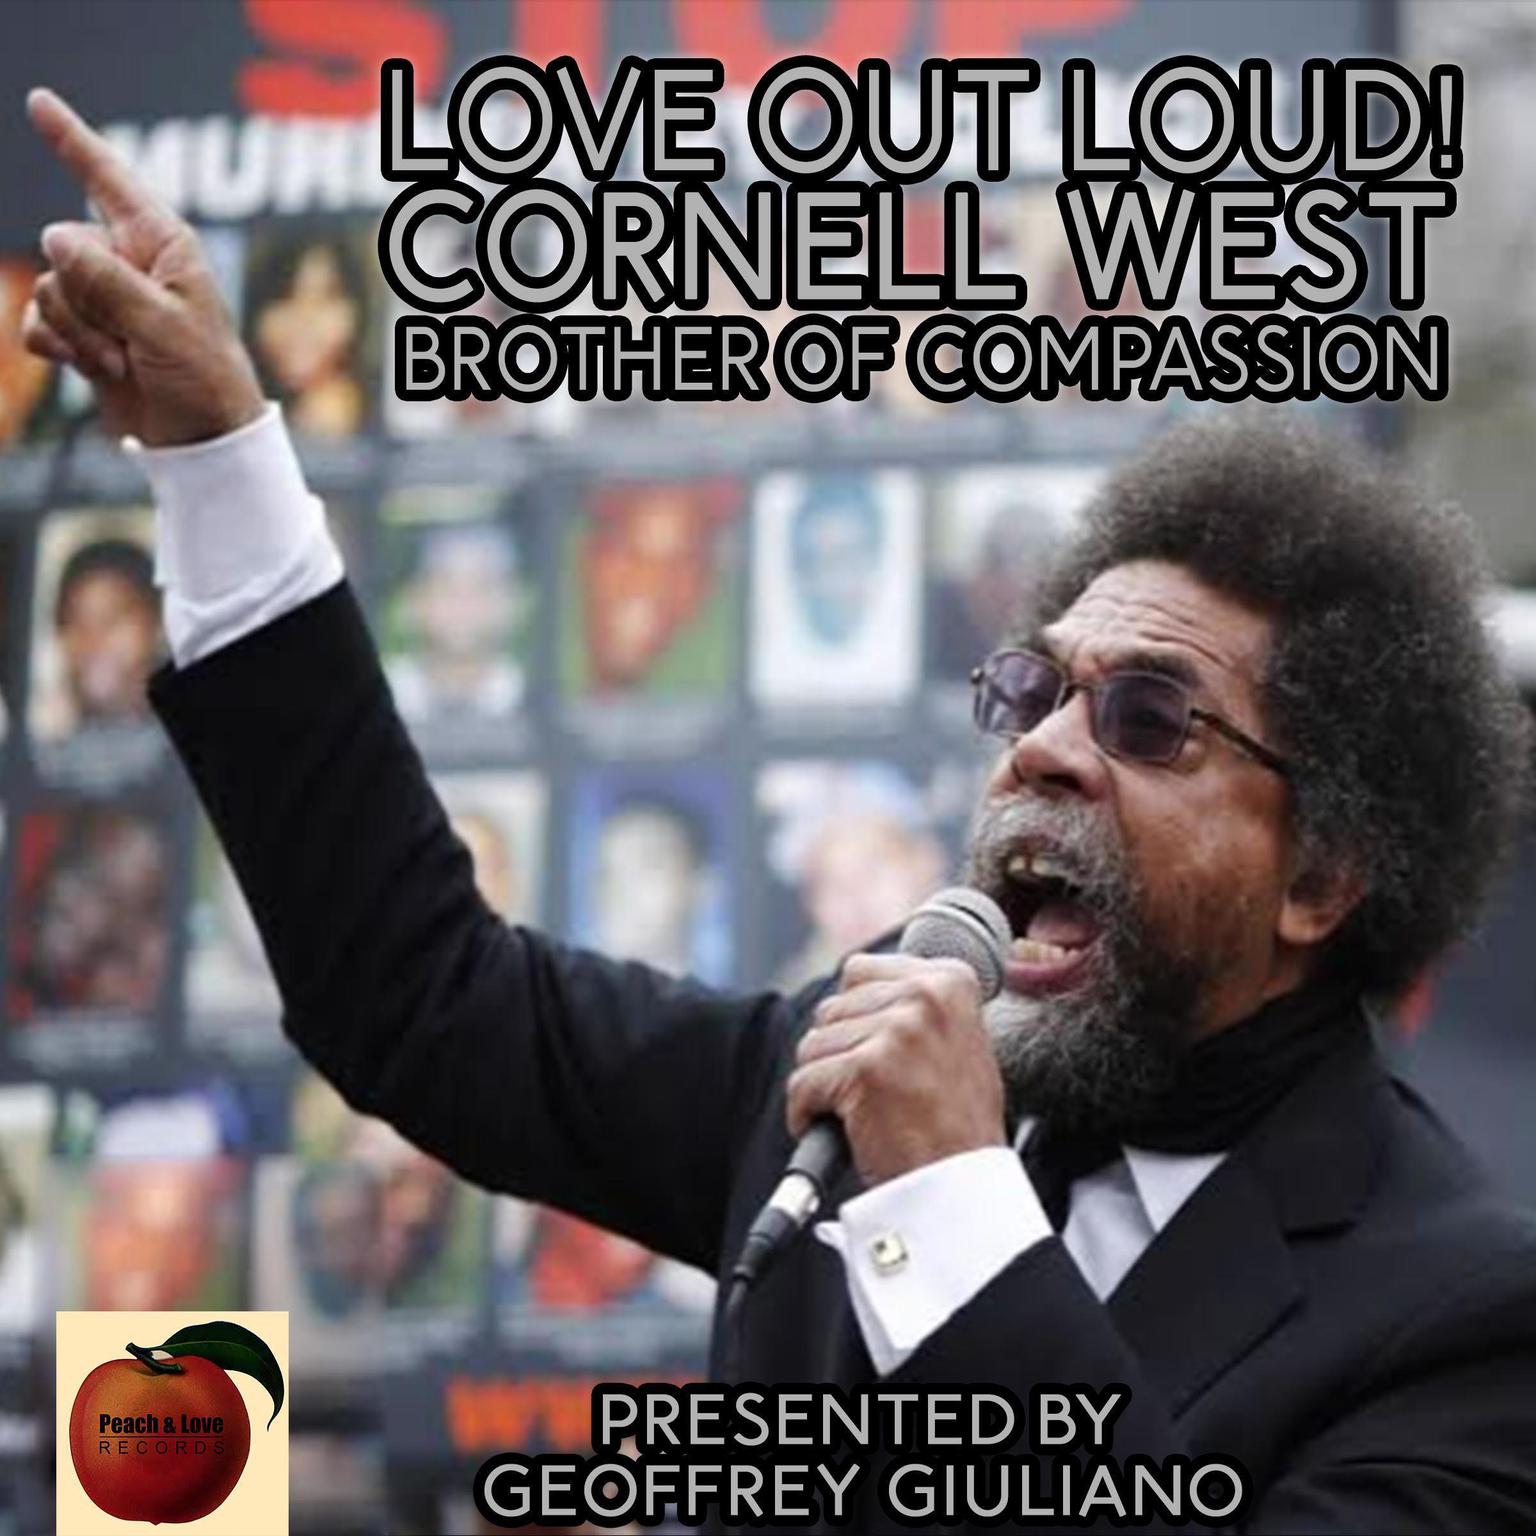 Love Out Loud! Cornel West; Brother of Compassion Audiobook, by Geoffrey Giuliano